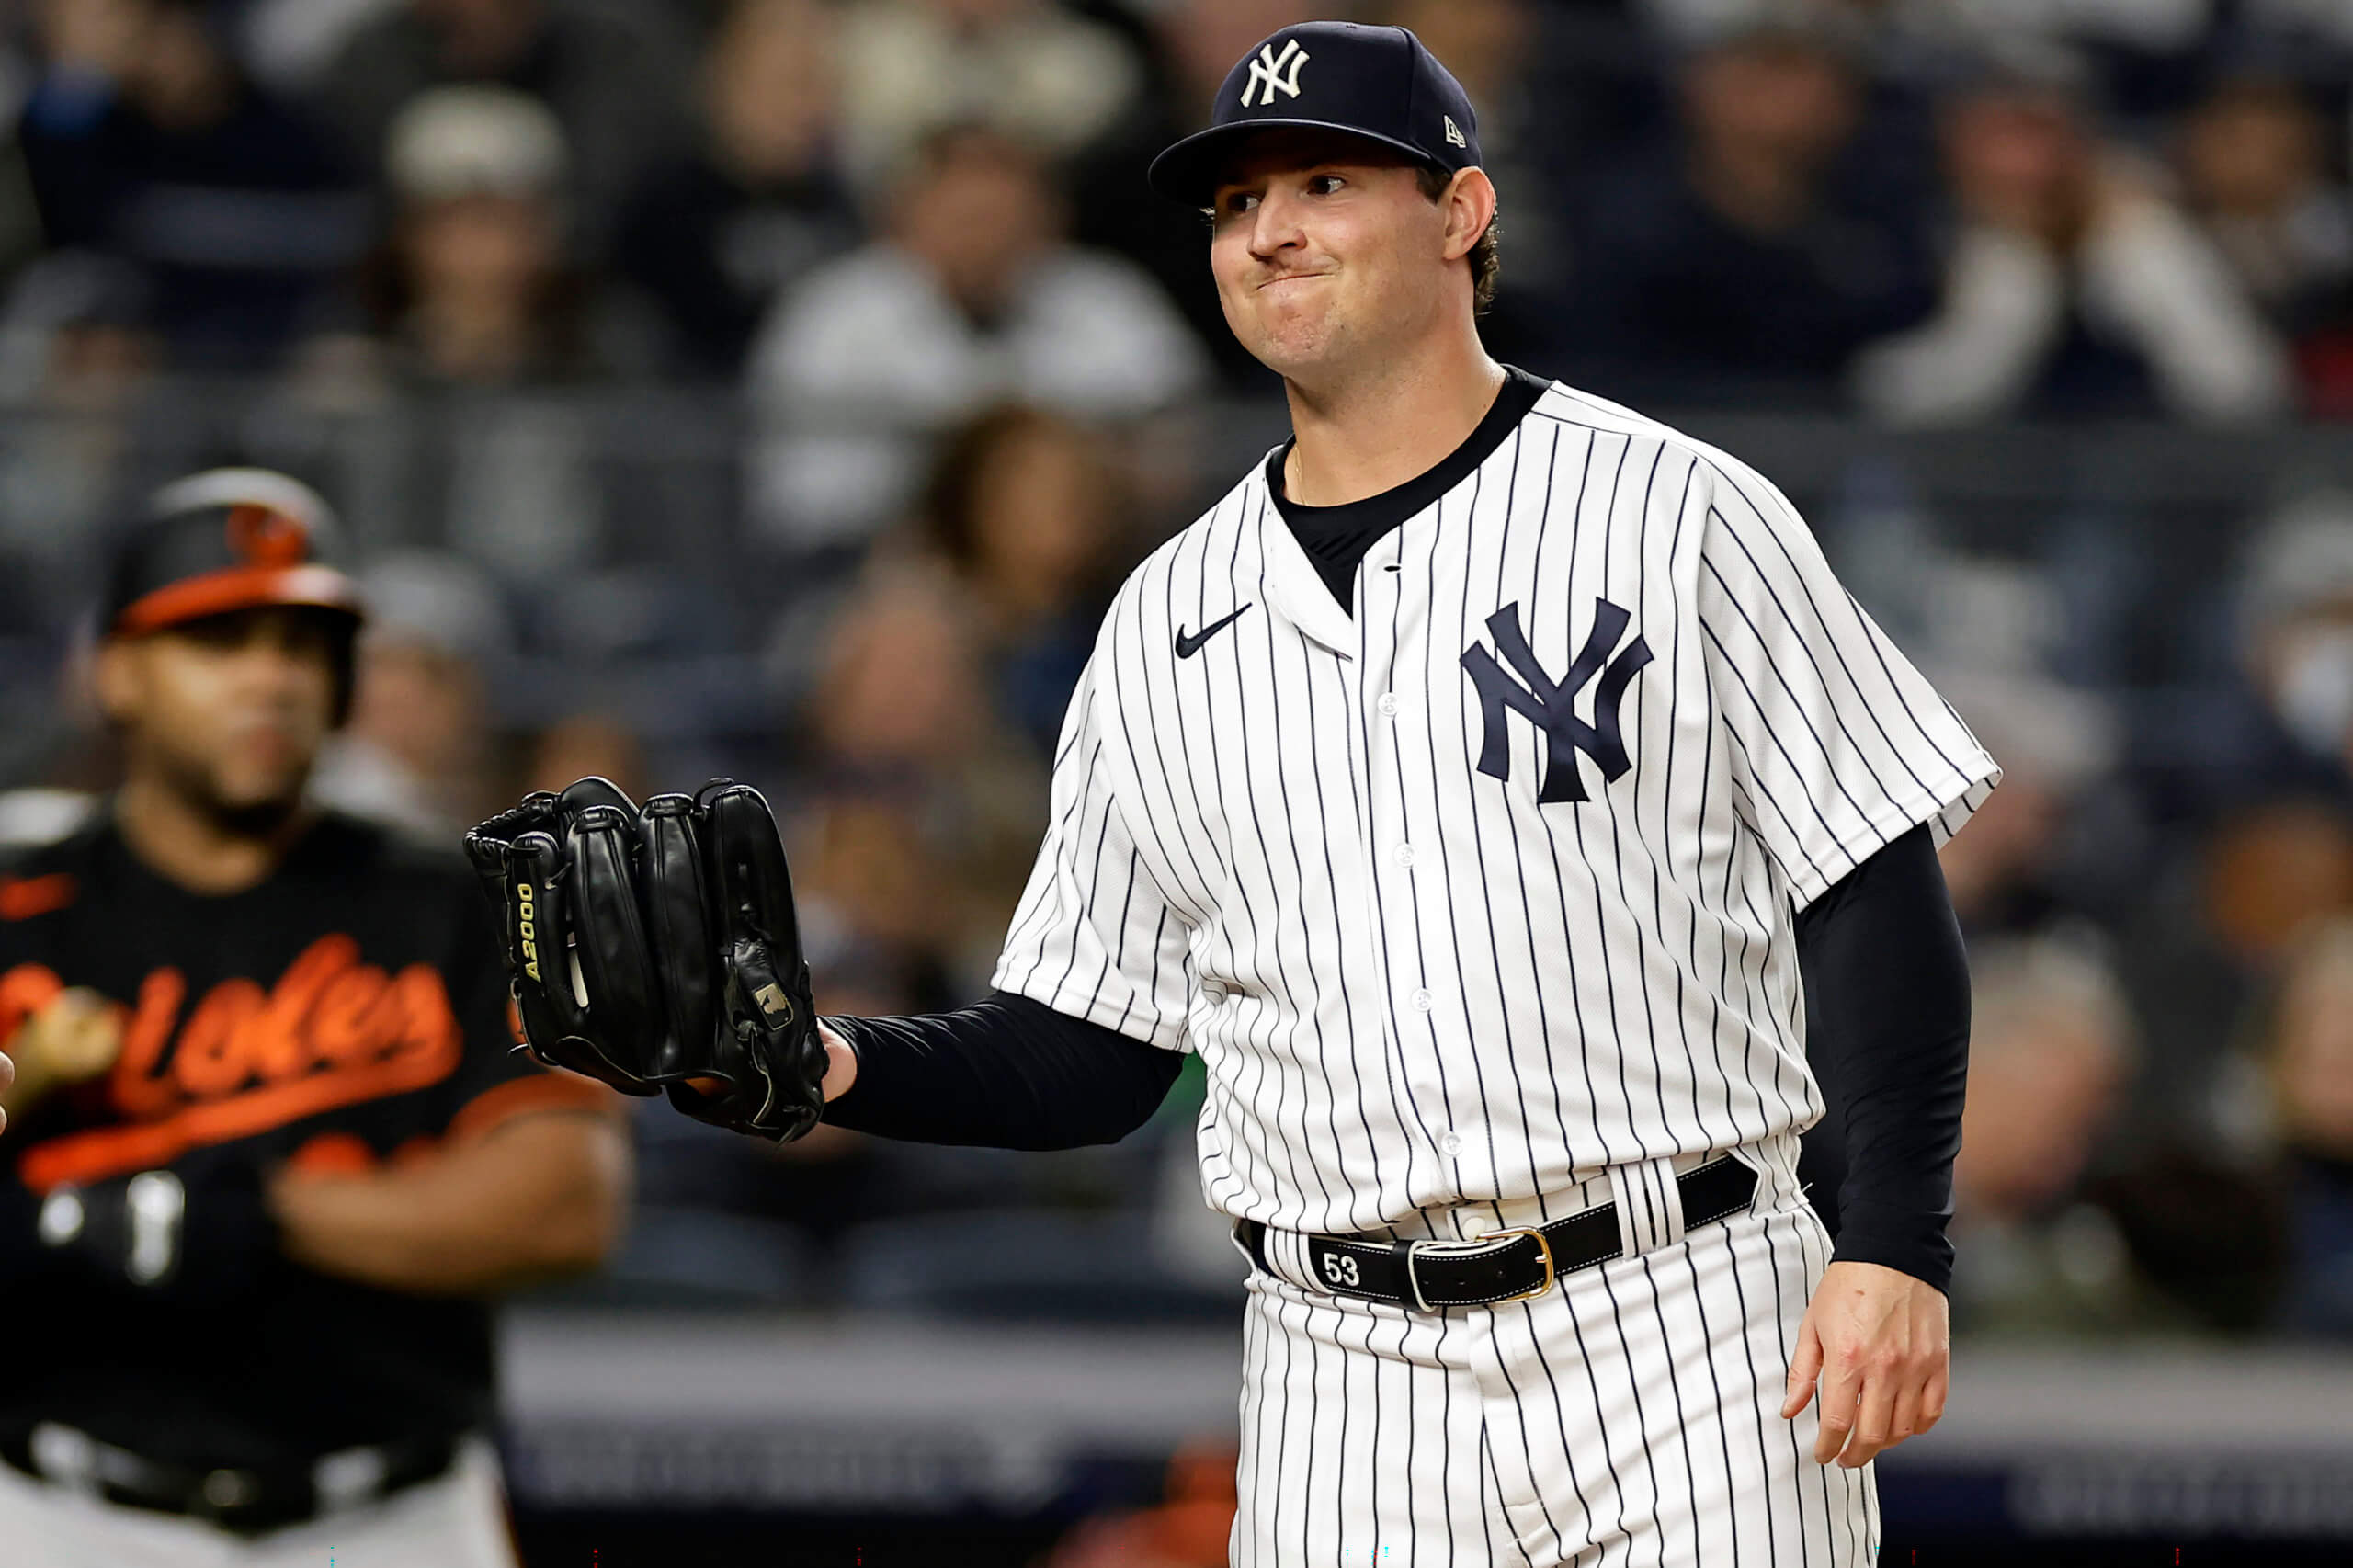 Yankees' Britton surgery set, likely out until May